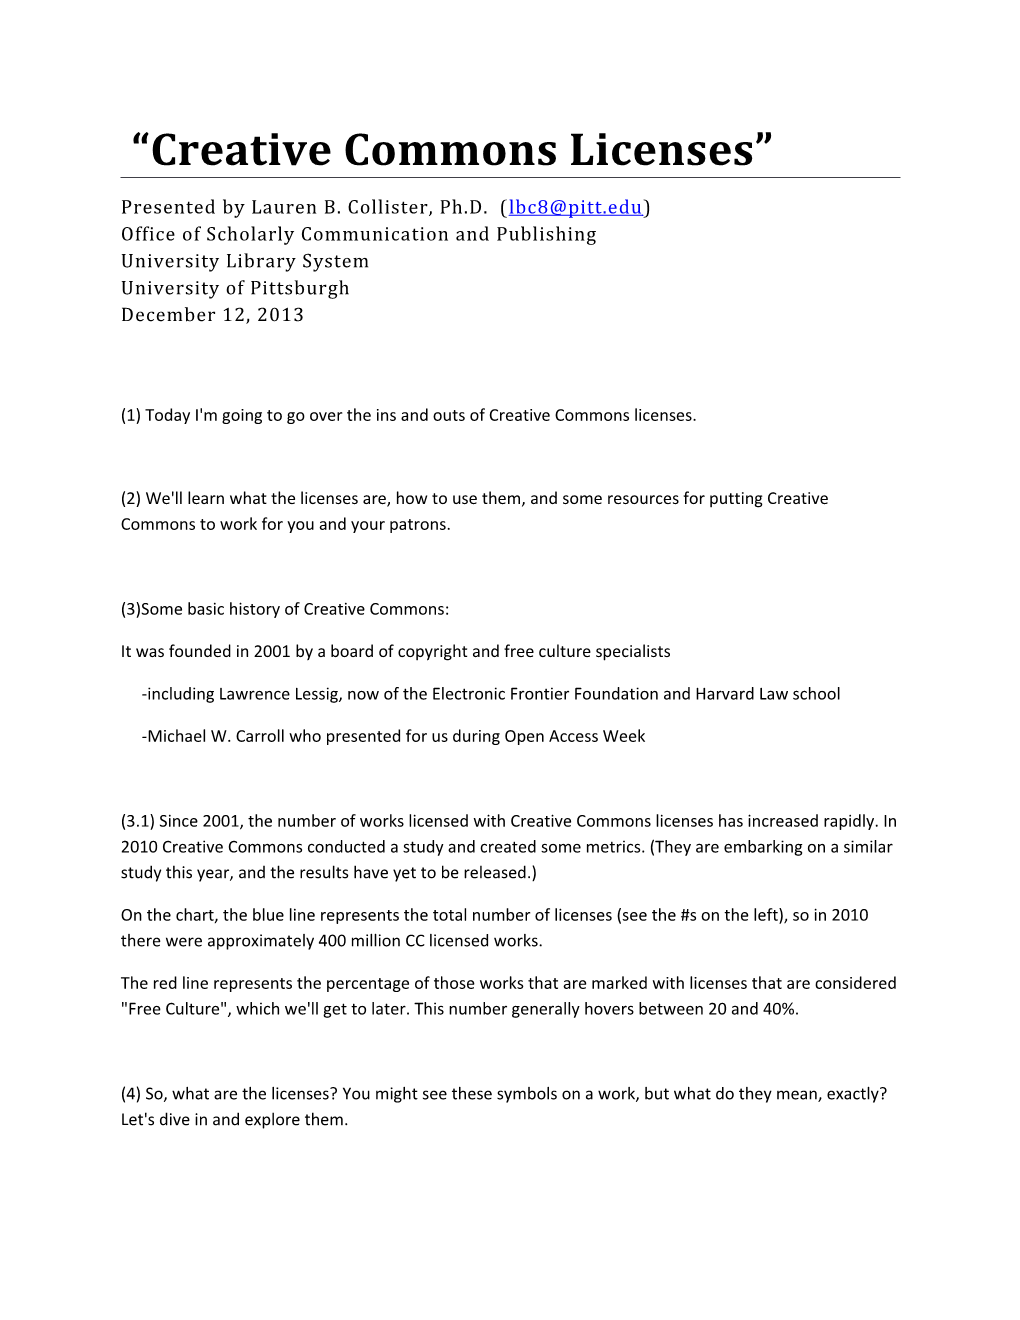 (1) Today I'm Going to Go Over the Ins and Outs of Creative Commons Licenses